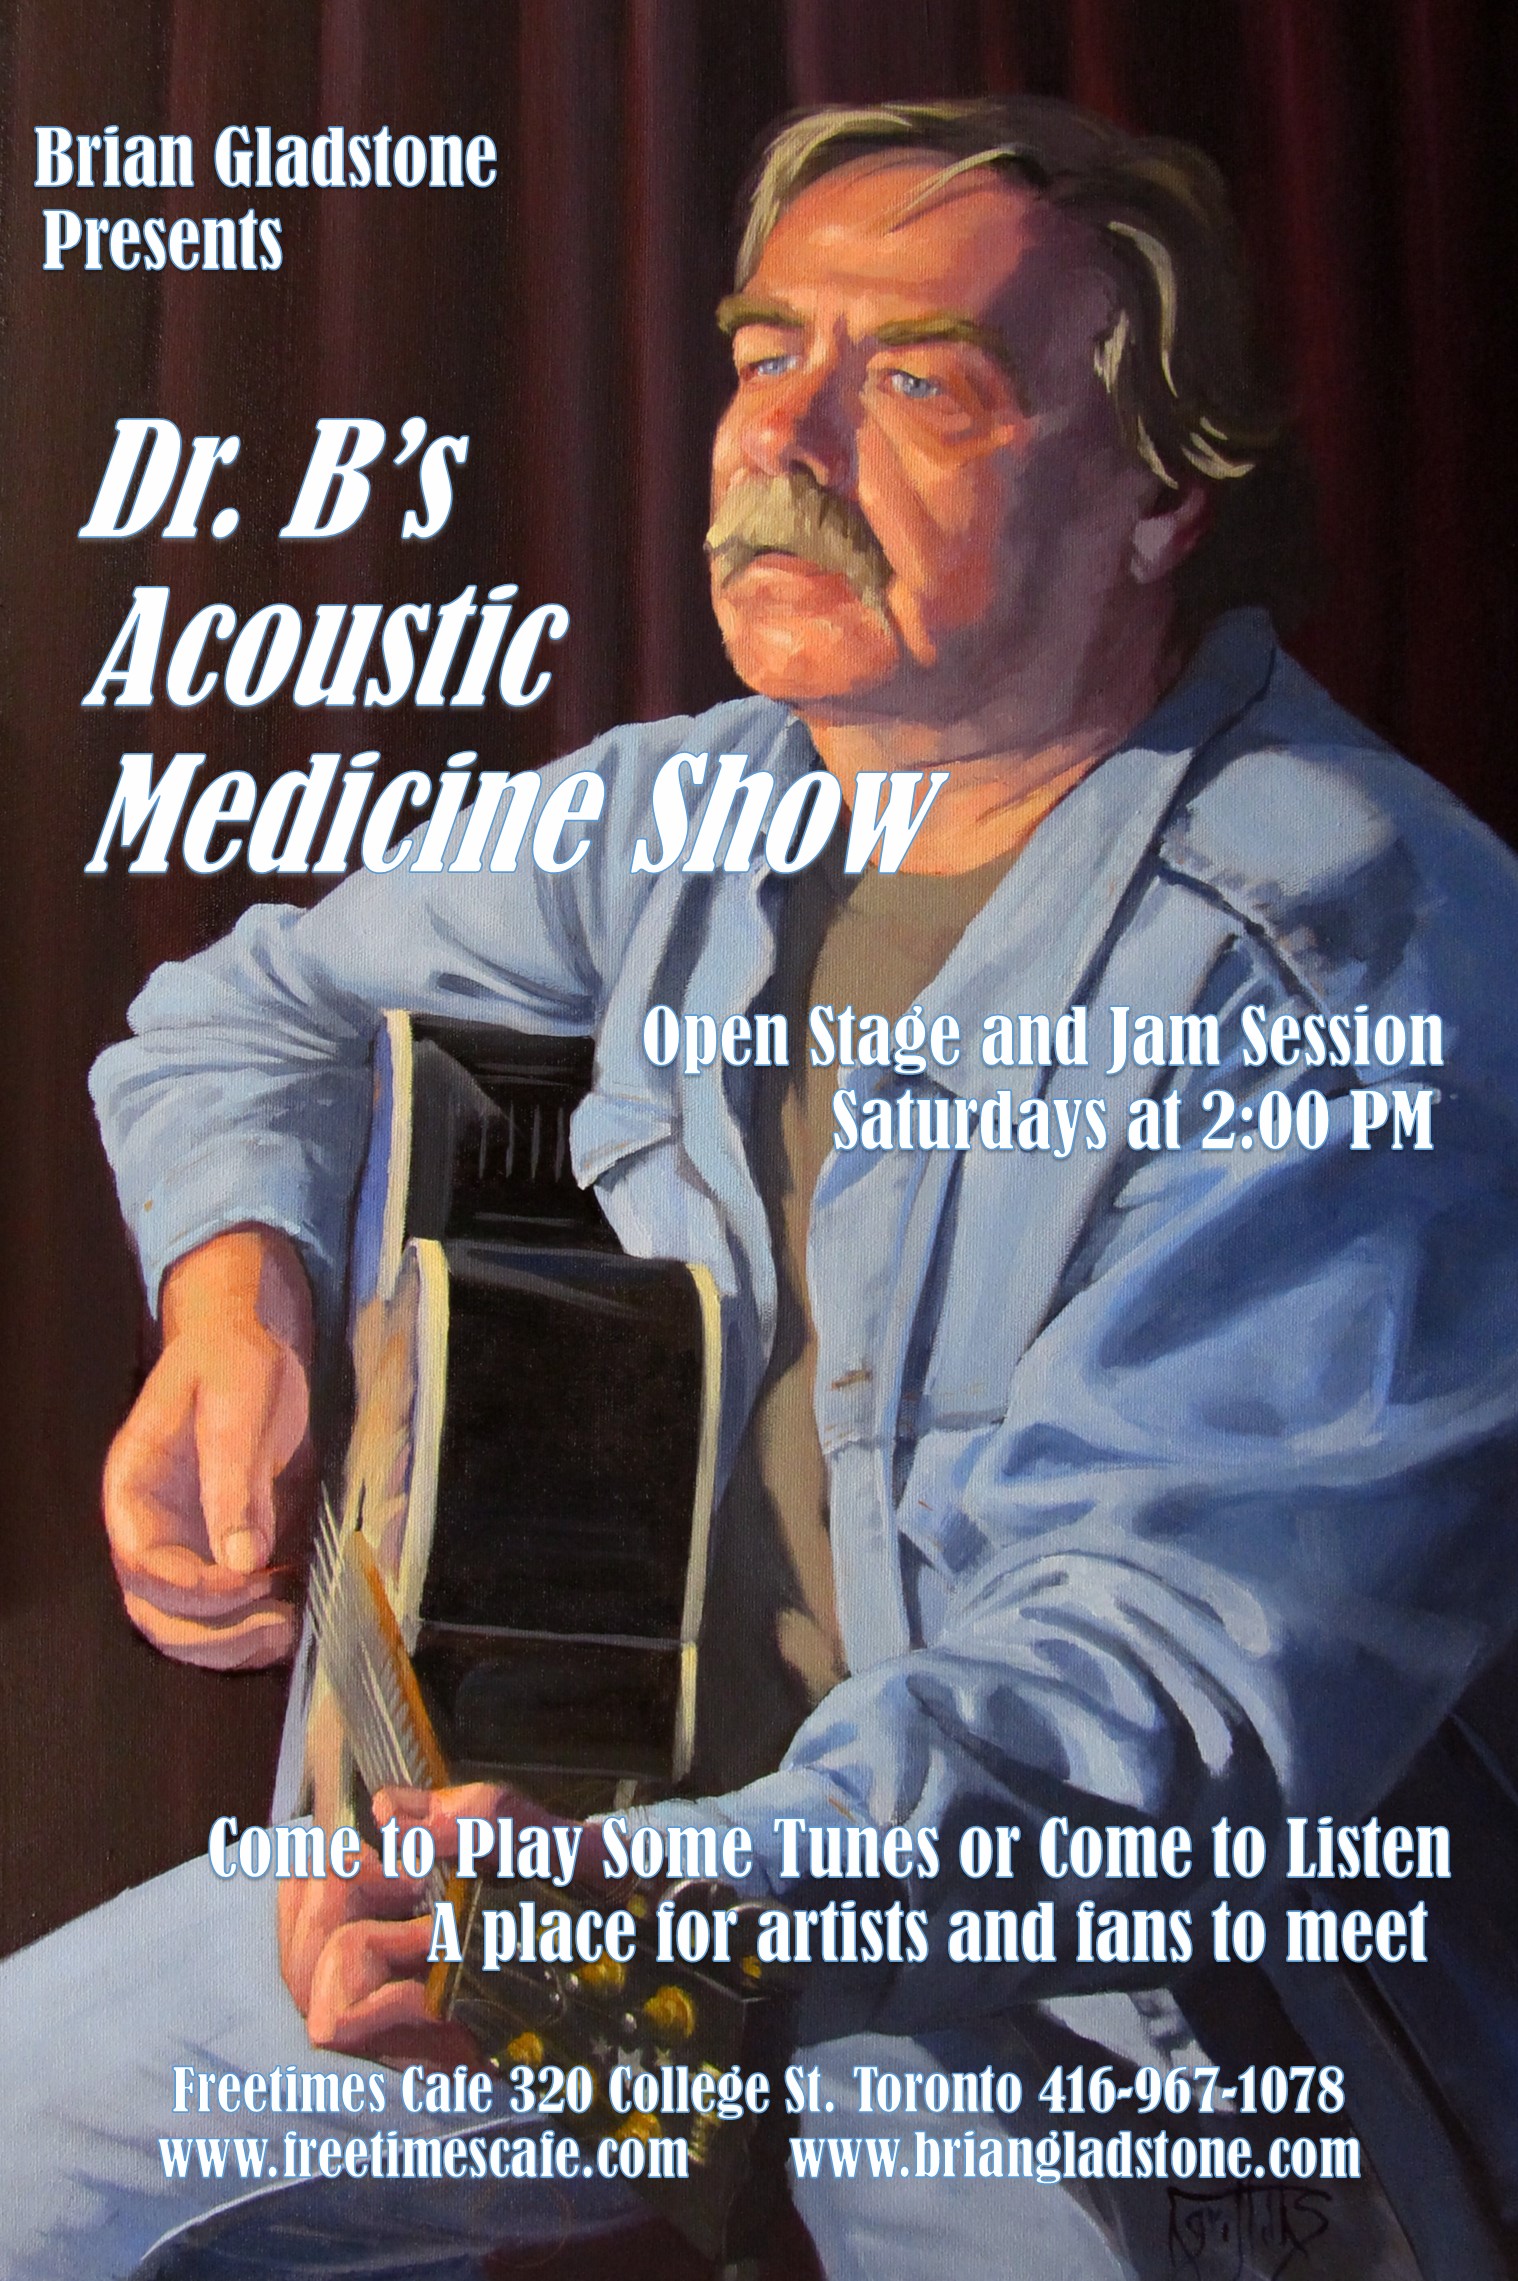 Another Exciting Episode of Dr. B’s Acoustic Medicine Show